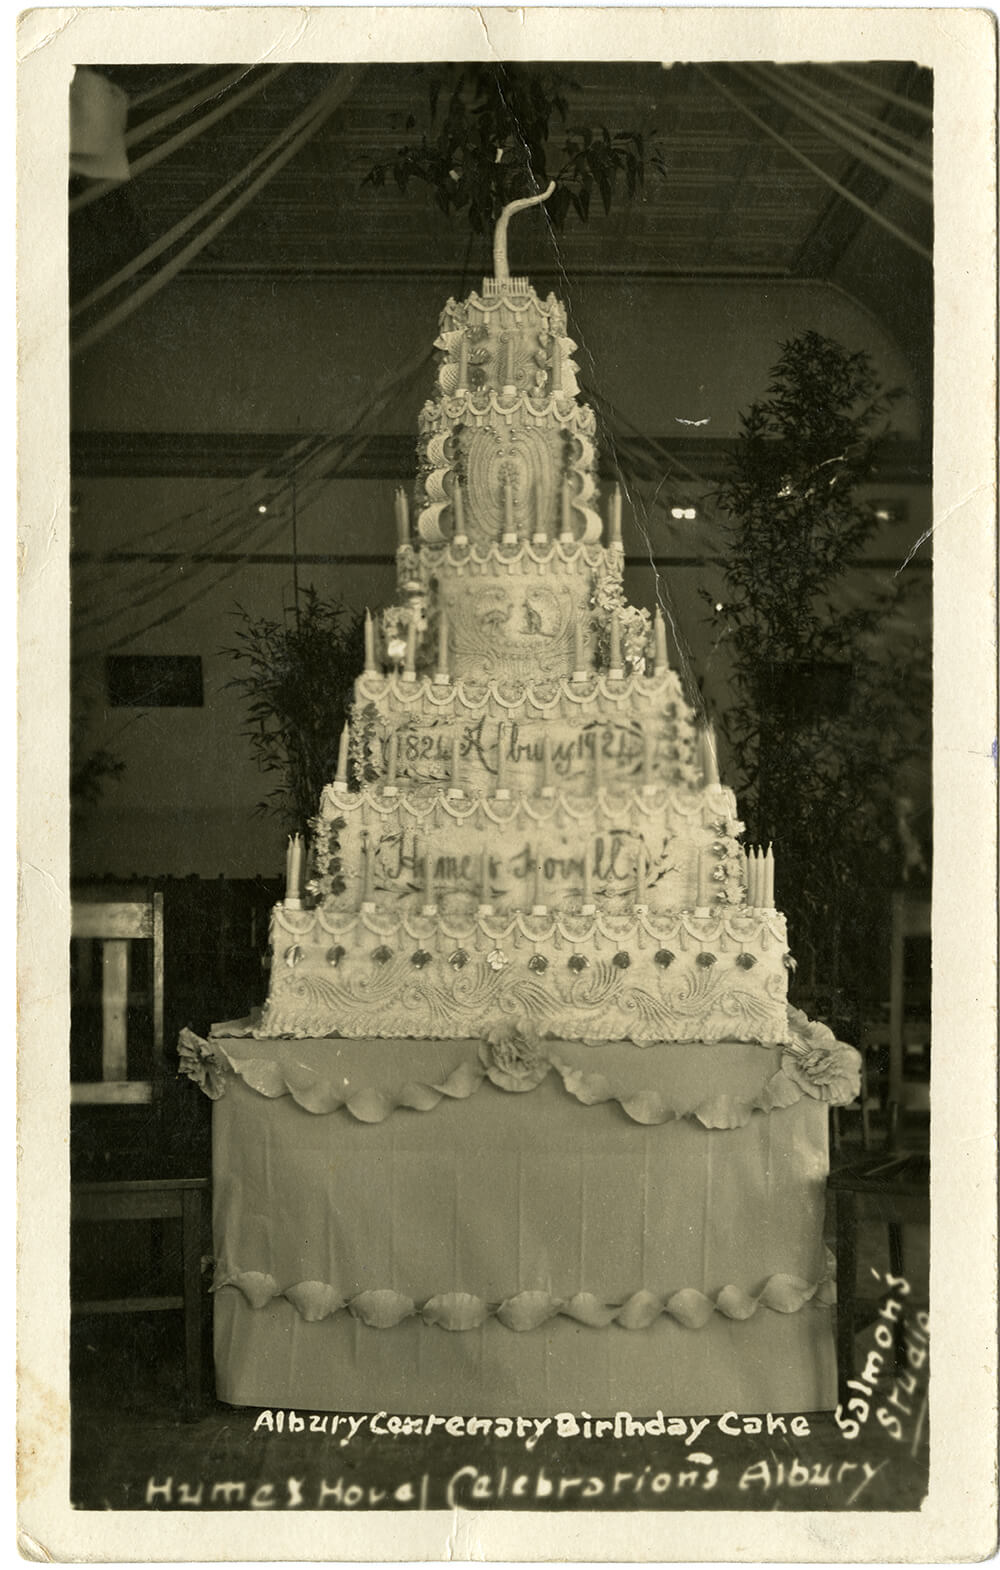 Six tiered, elaborately decorated cake celebrating Albury's centennary and the Hume and Hovell celebrations, 1924. ARM 84.015